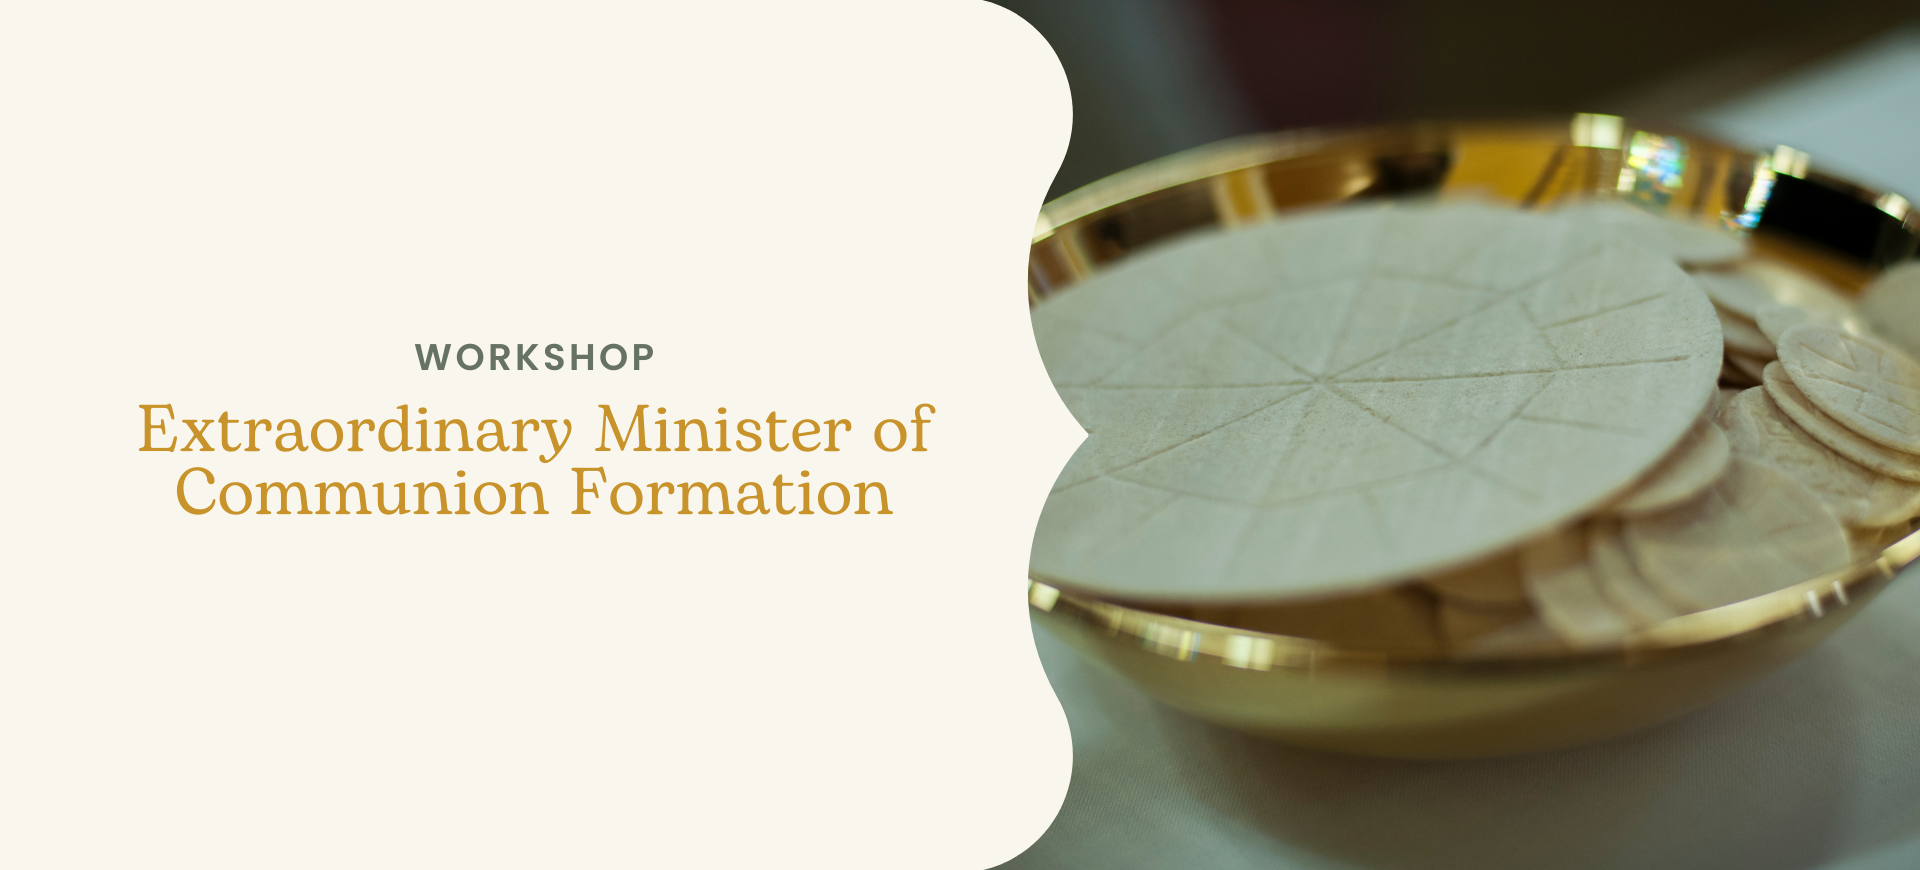 Extraordinary Minister of Communion Formation Workshops